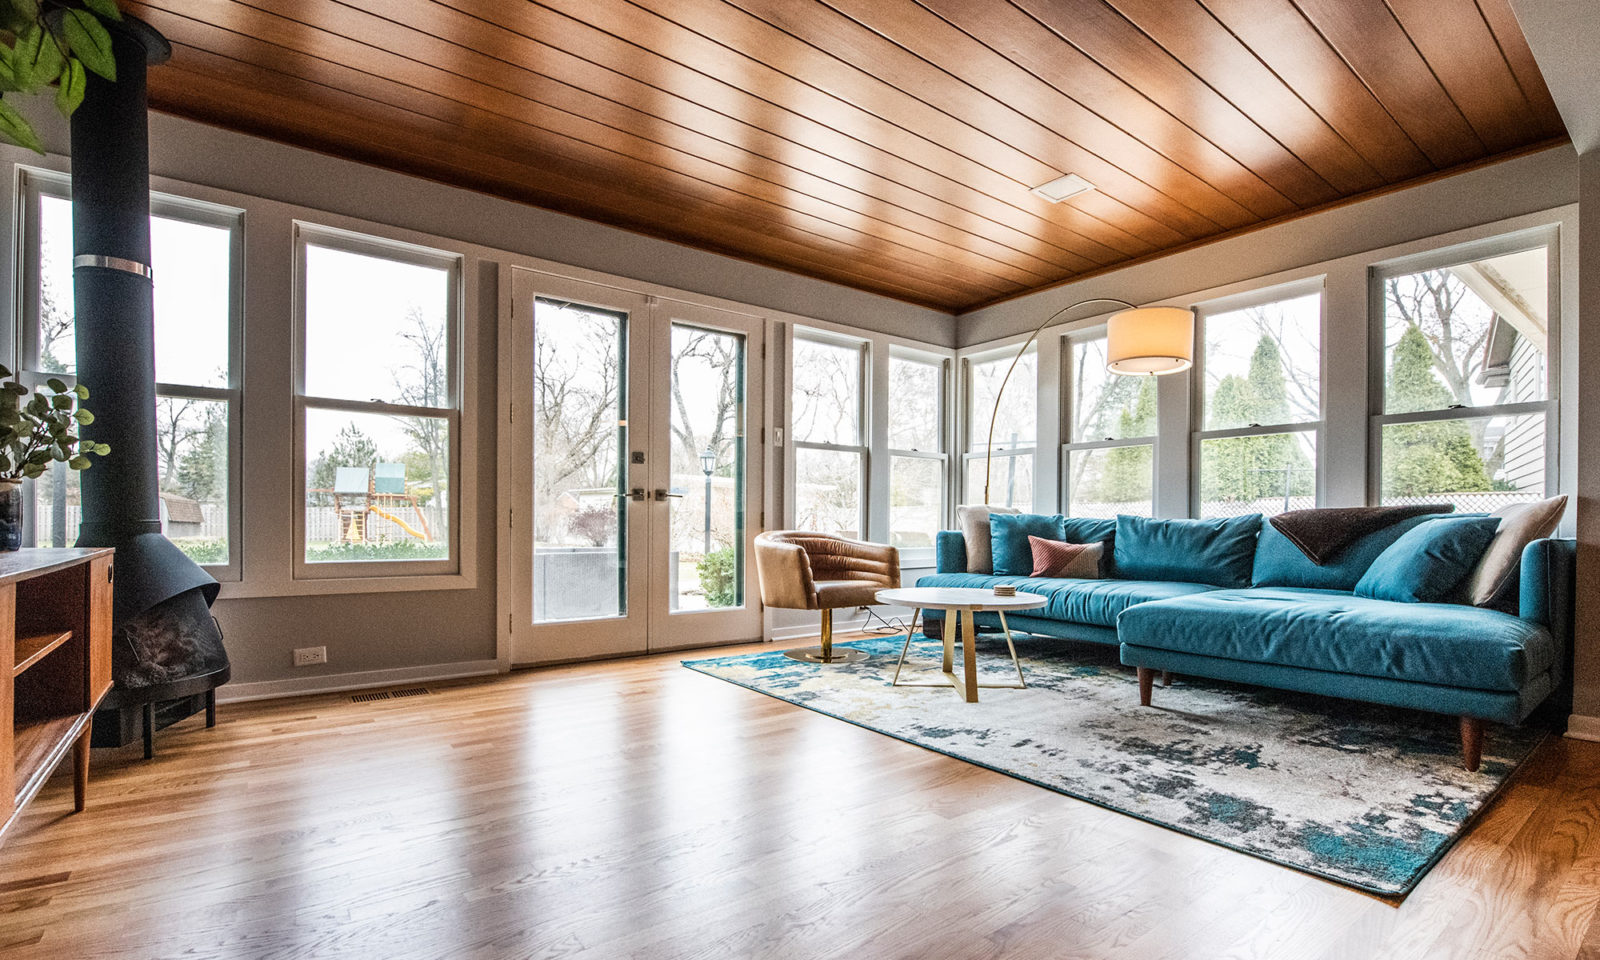 Bright living room with hardwood floors and ceiling a blue sectional and cast iron fireplace